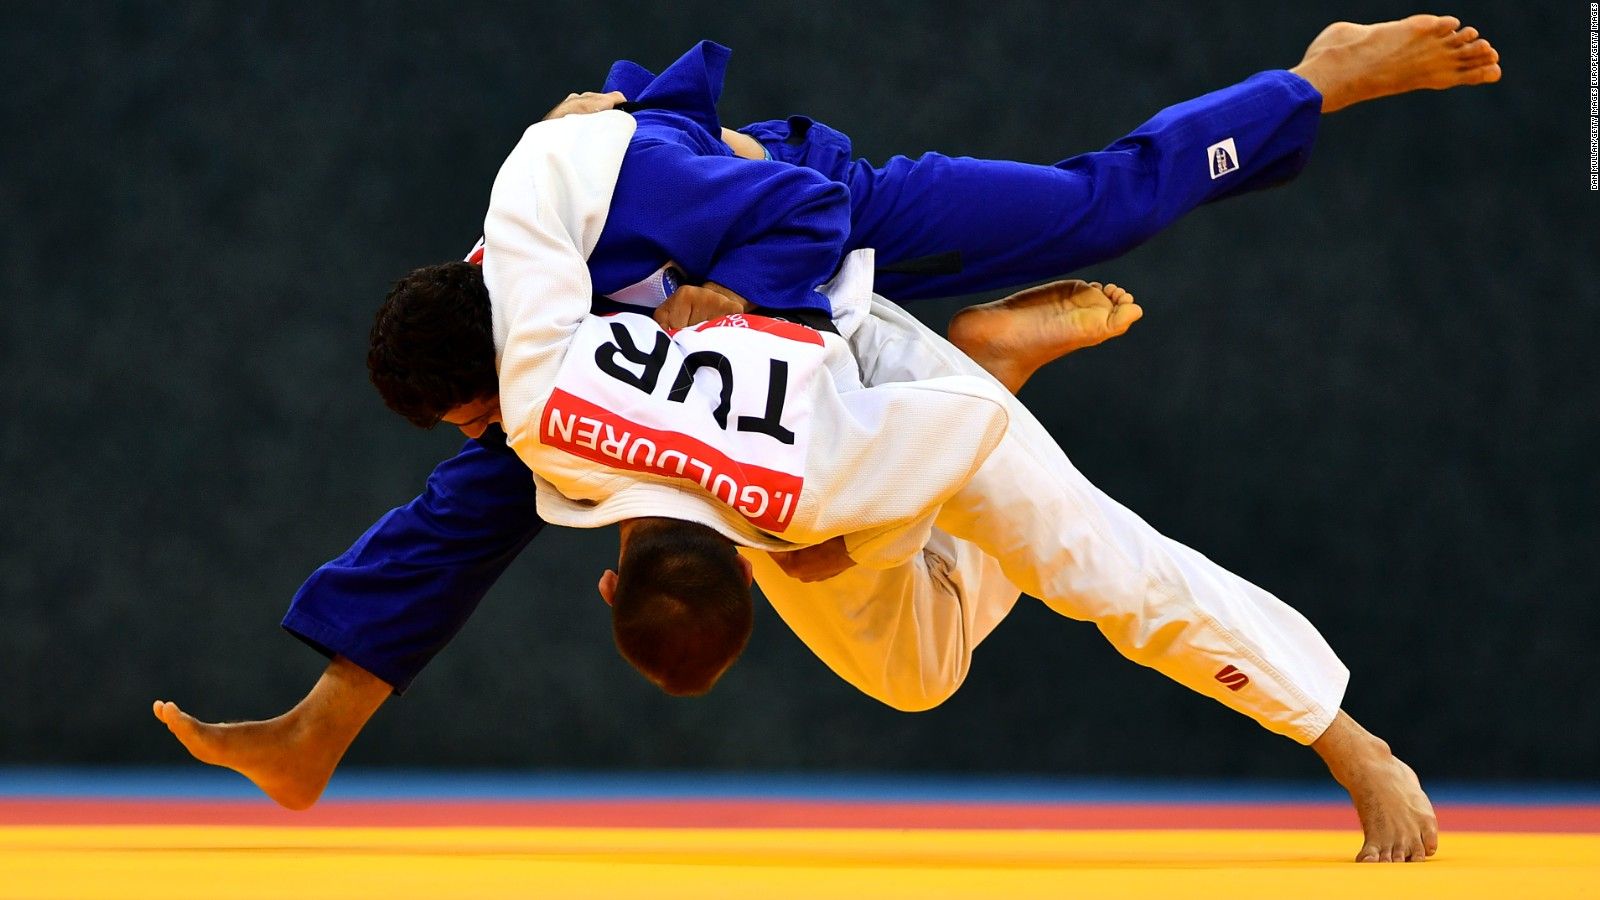 World Judo Championships: An introduction to the 'gentle way'